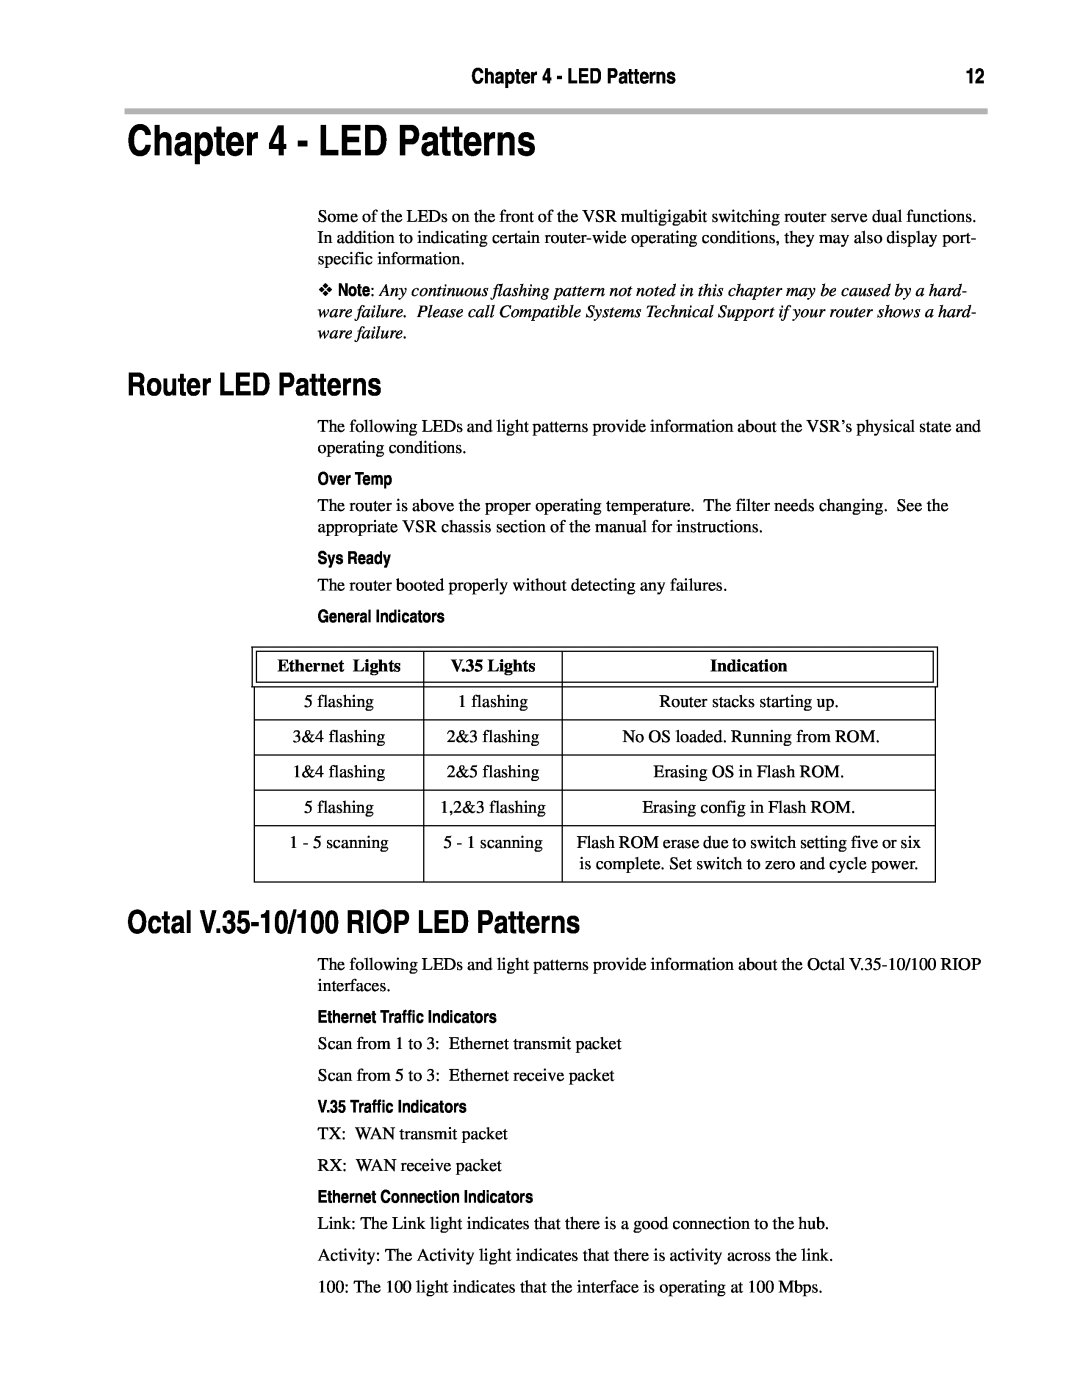 Compatible Systems Router LED Patterns, Octal V.35-10/100 RIOP LED Patterns, Over Temp, Sys Ready, Ethernet Lights 